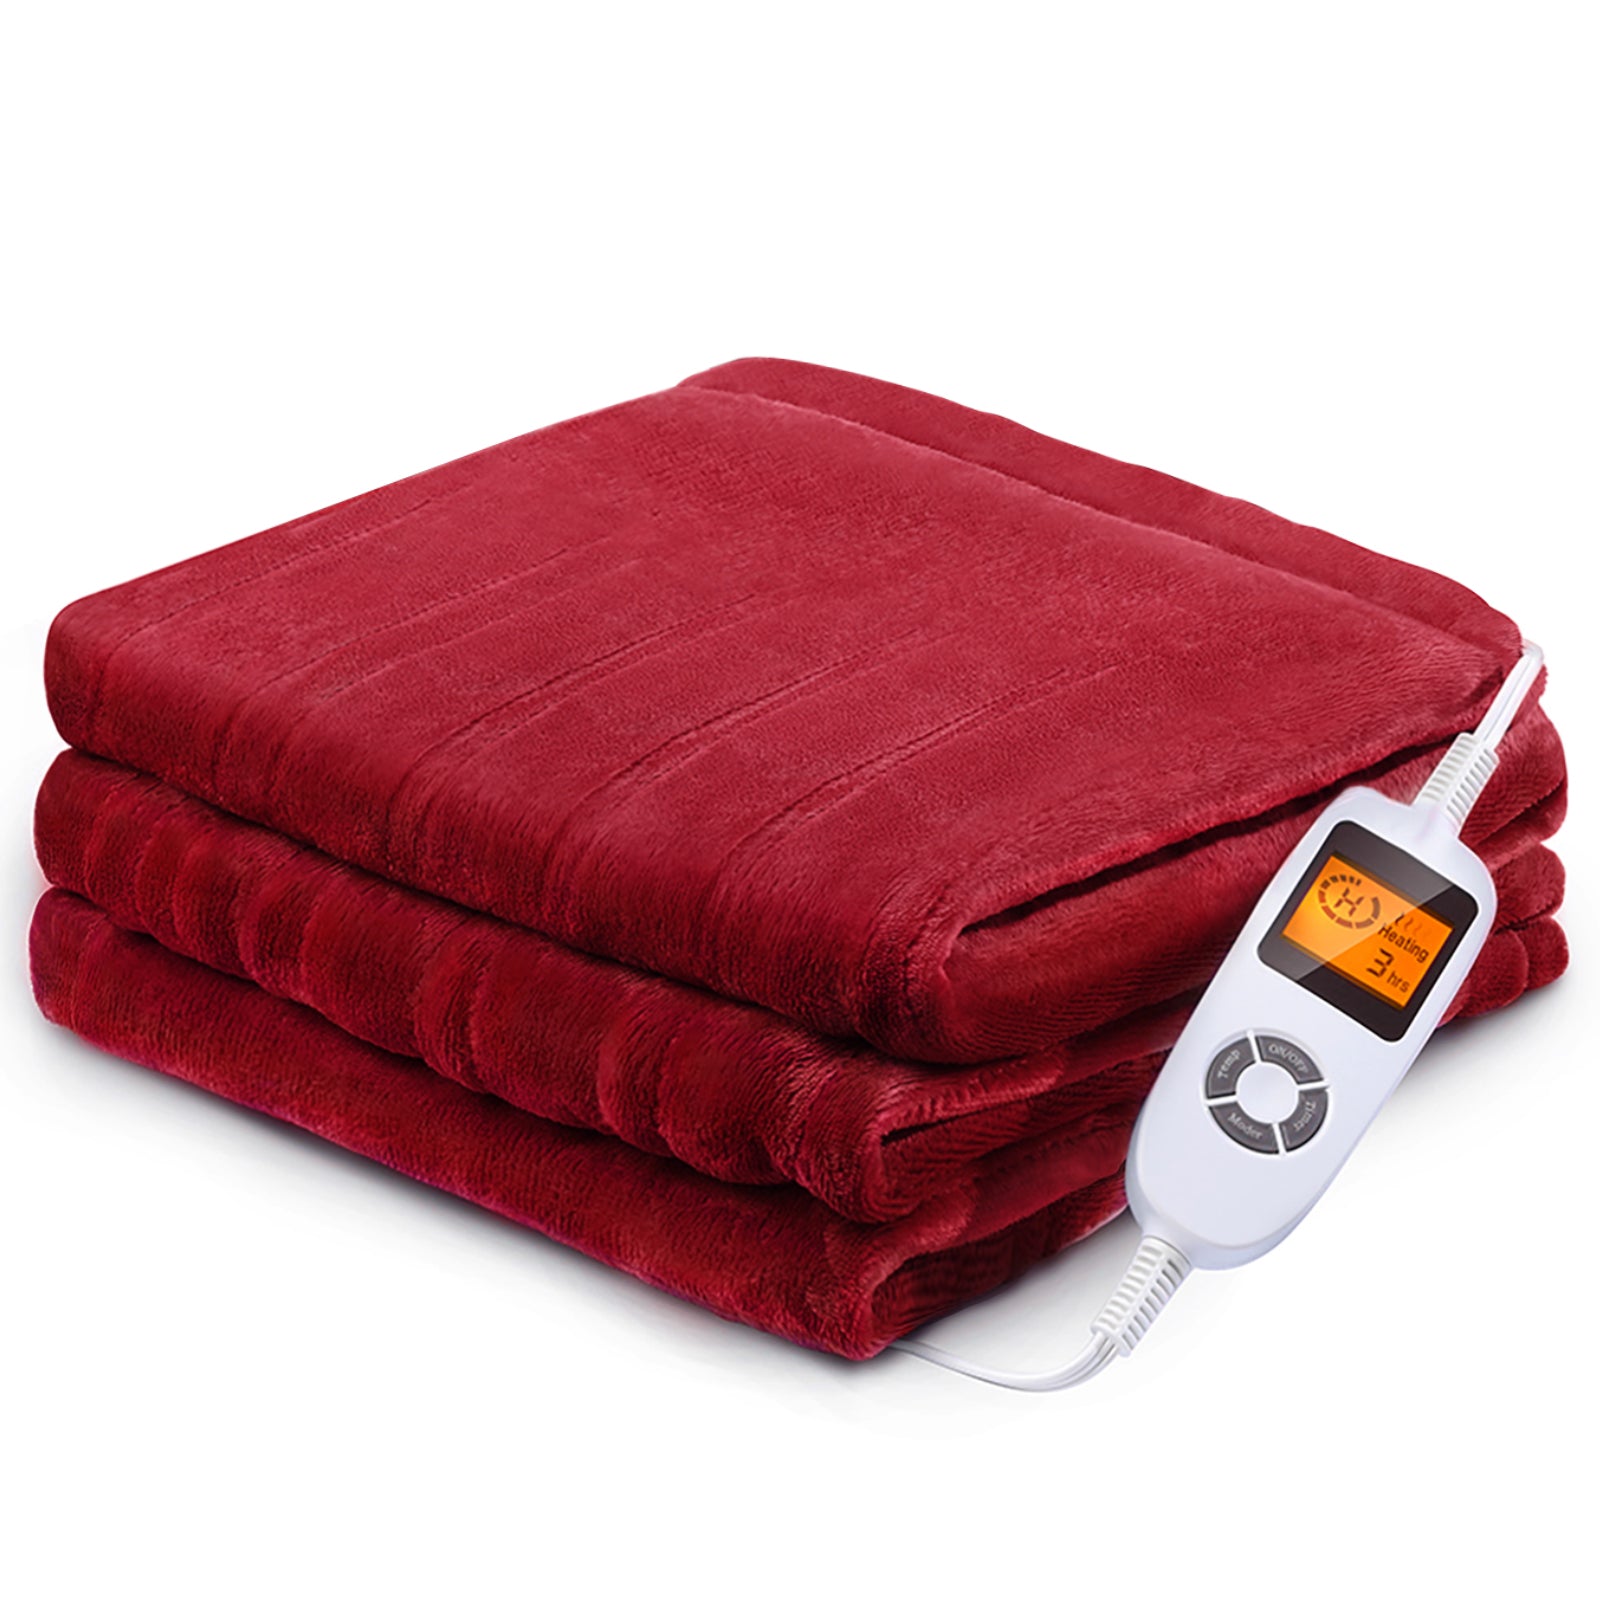  Electric Heated Blanket 72x84 Full Size with 4